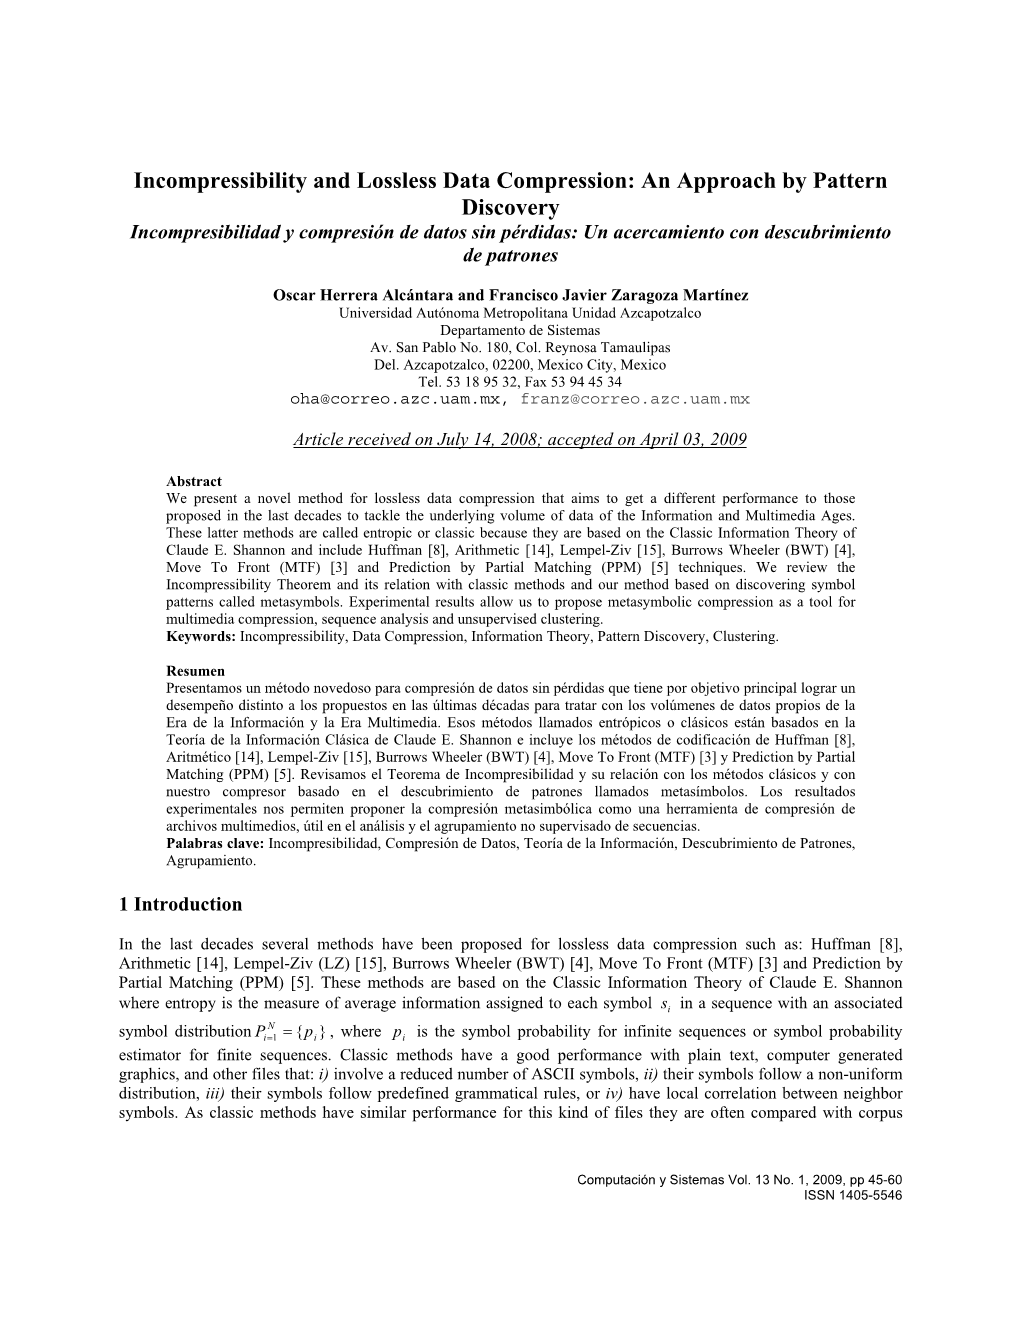 Incompressibility and Lossless Data Compression: an Approach By